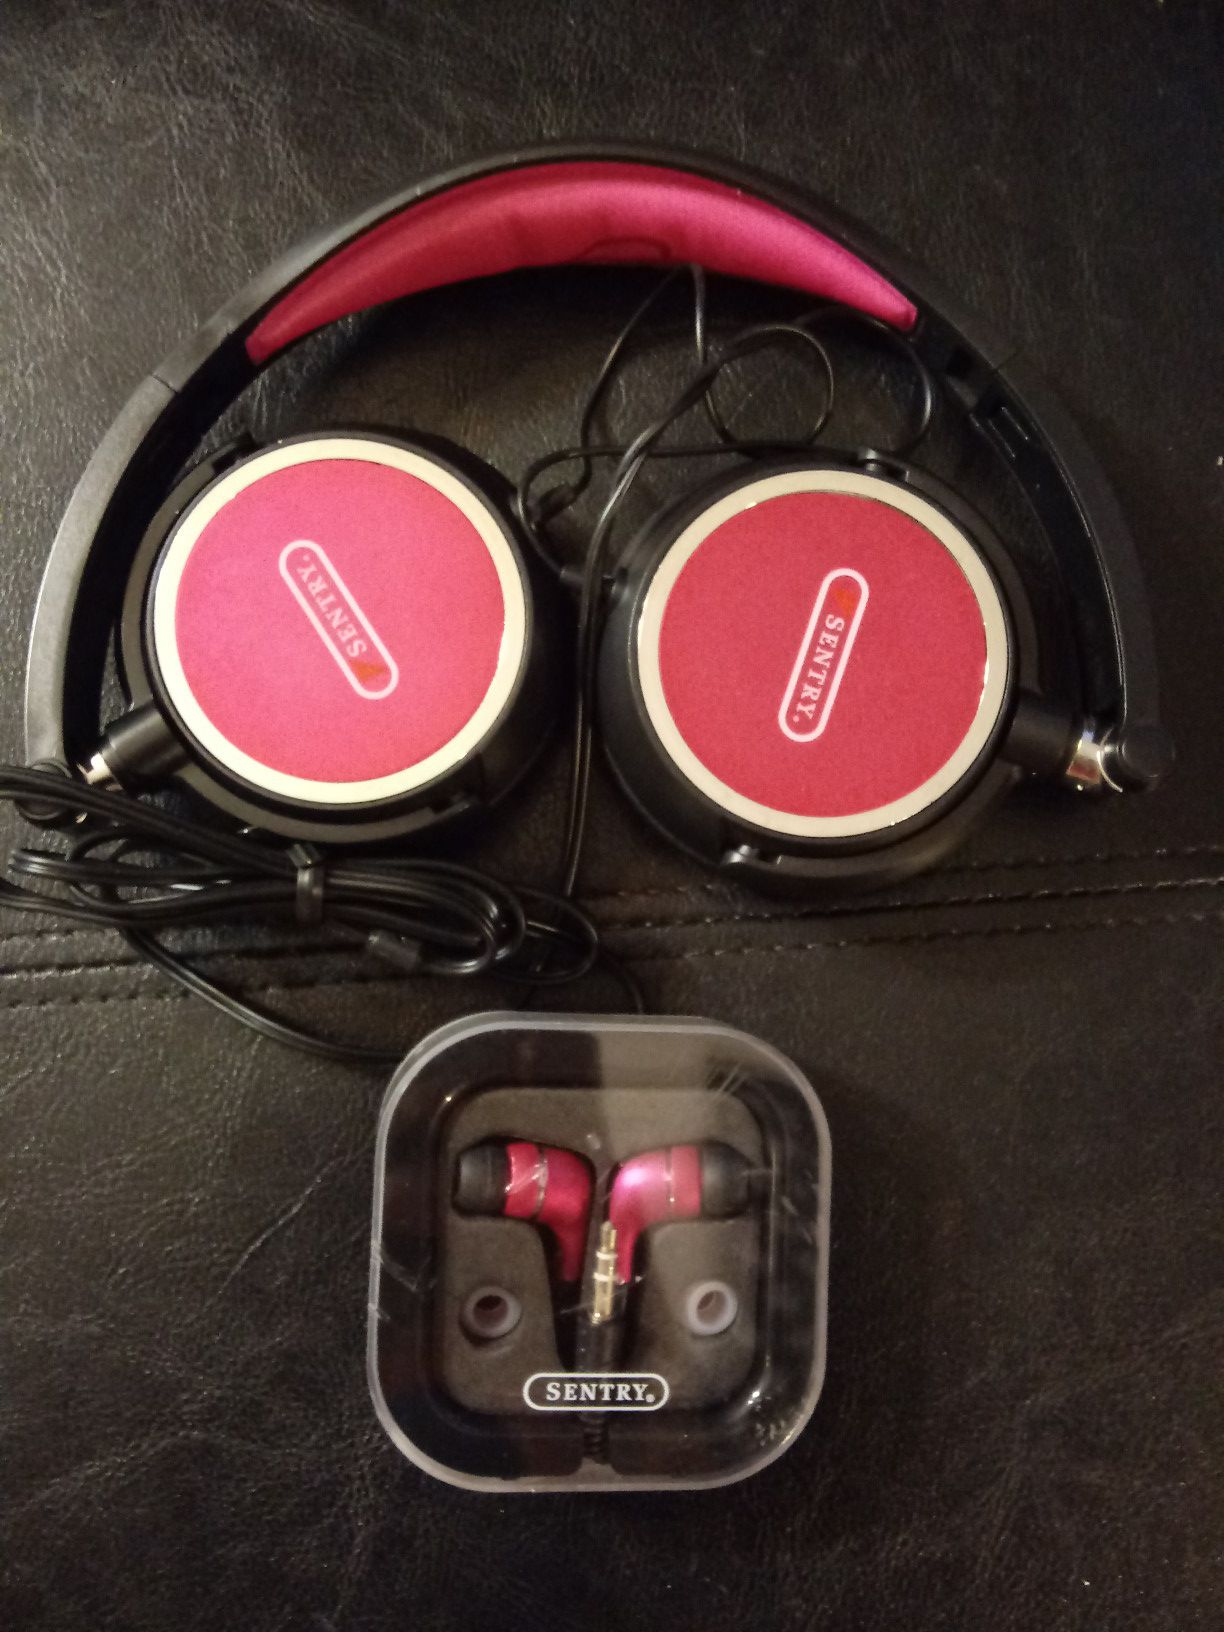 Sentry headphones and earbuds